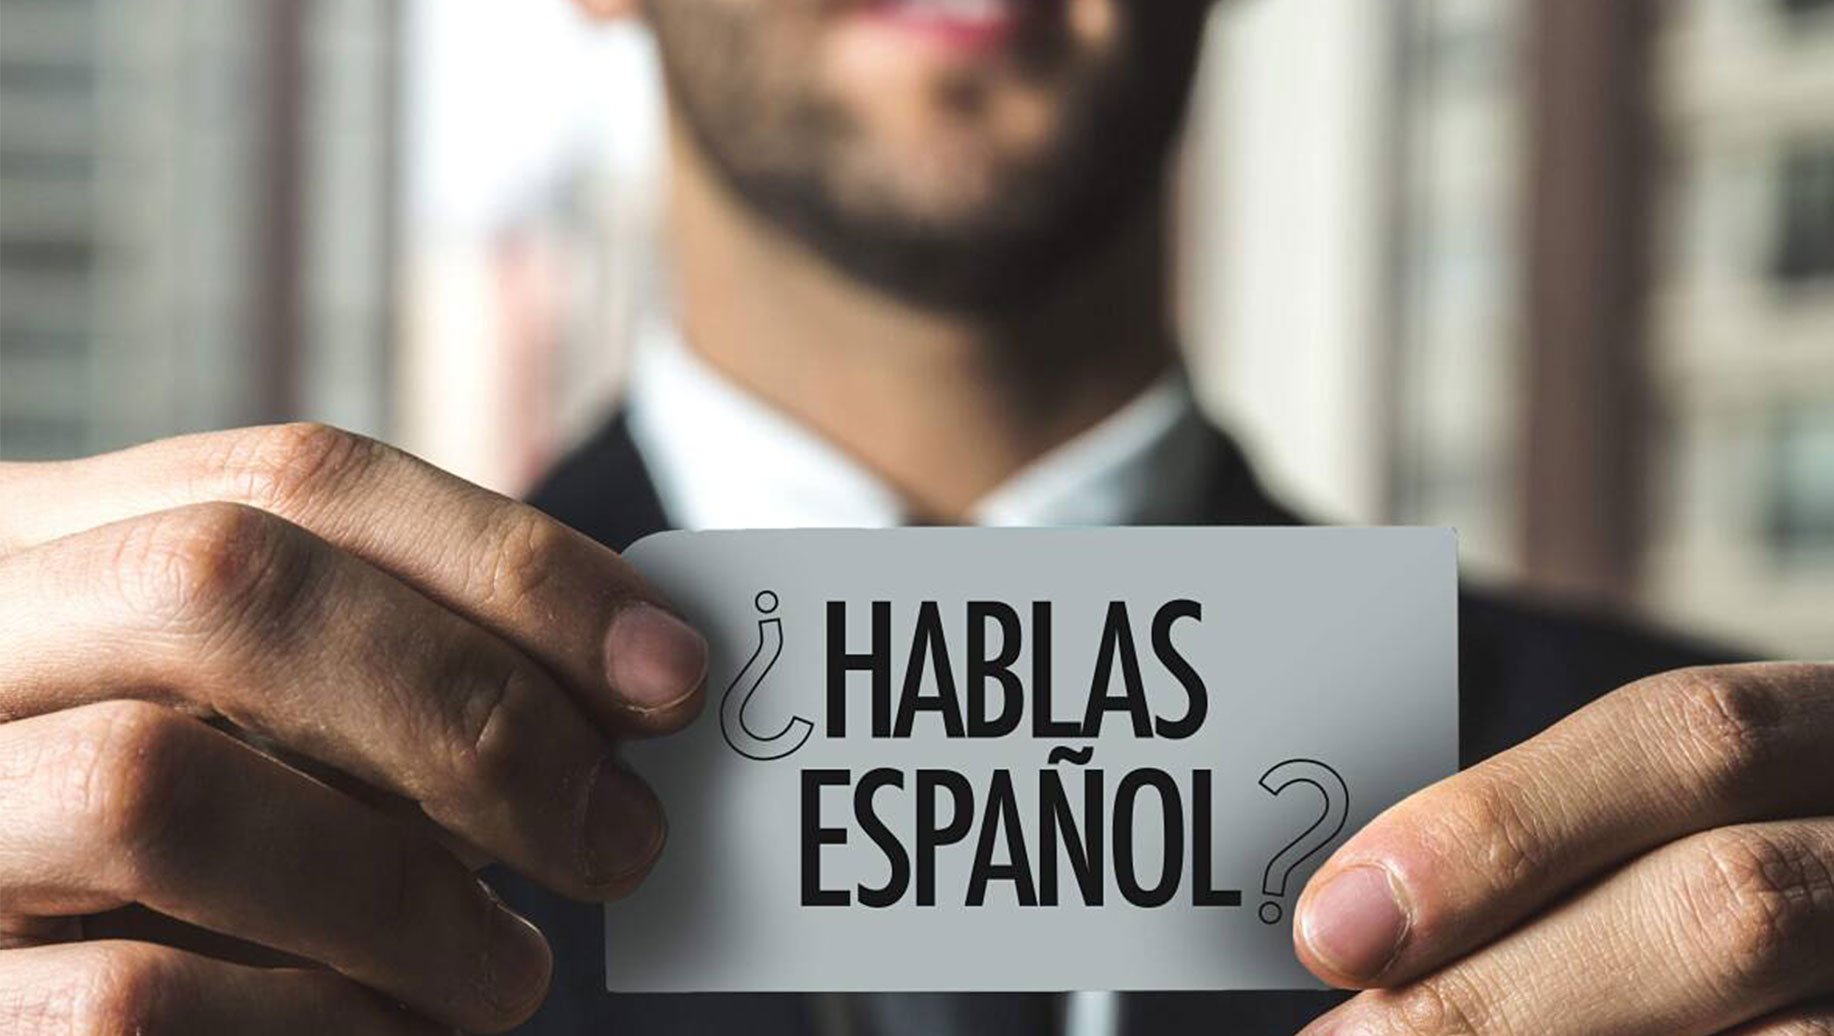 5 Tips for Engaging Spanish Speaking Insurance Customers